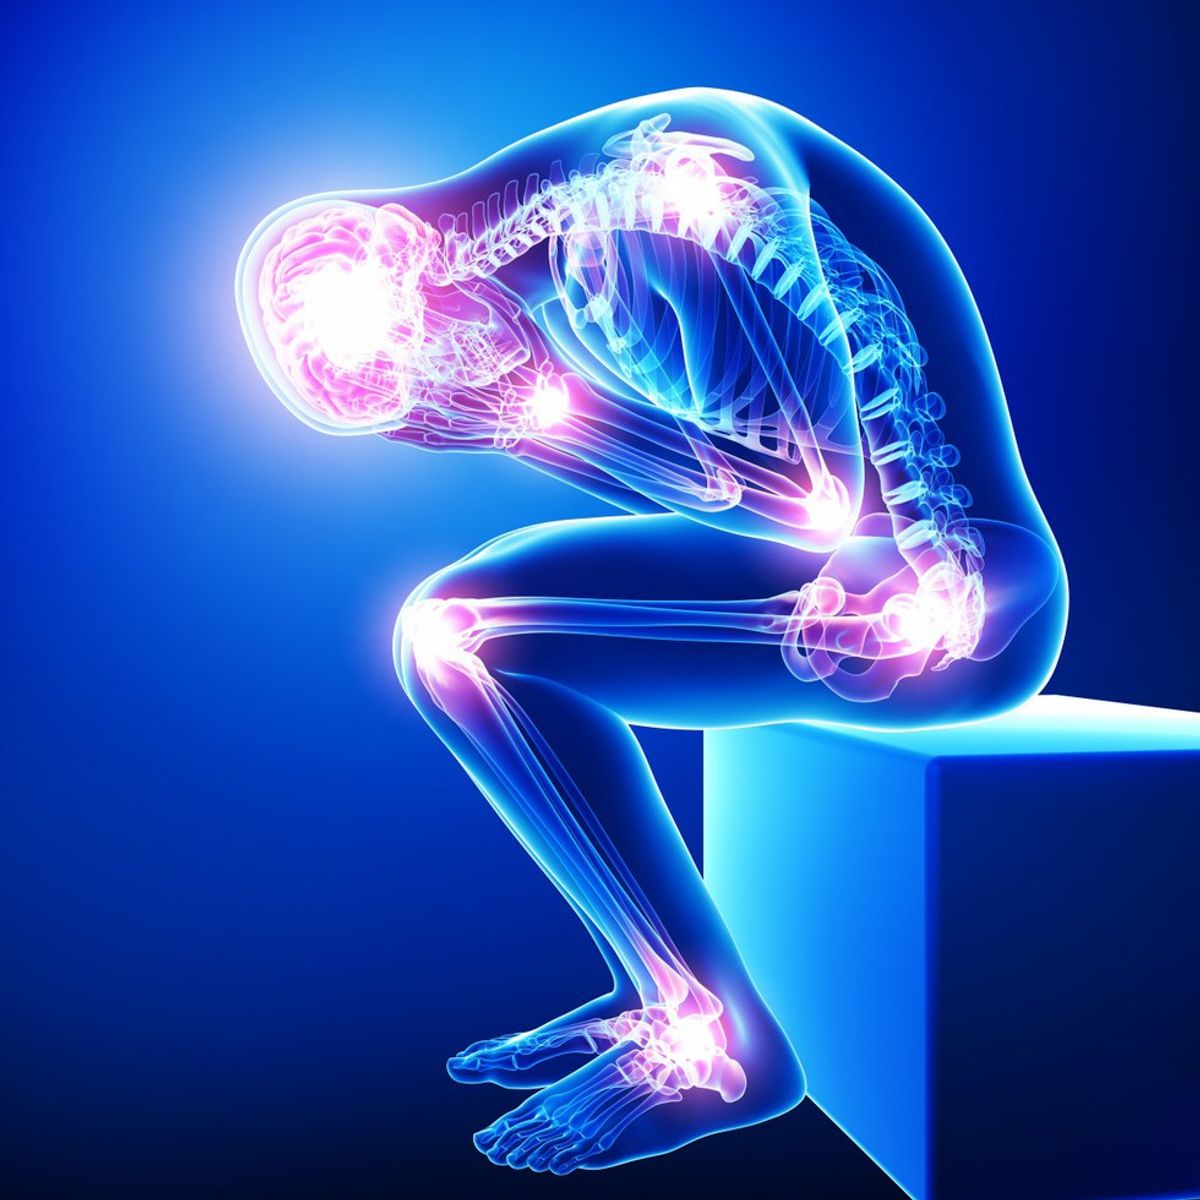 7 Things No One Tells You About Fibromyalgia